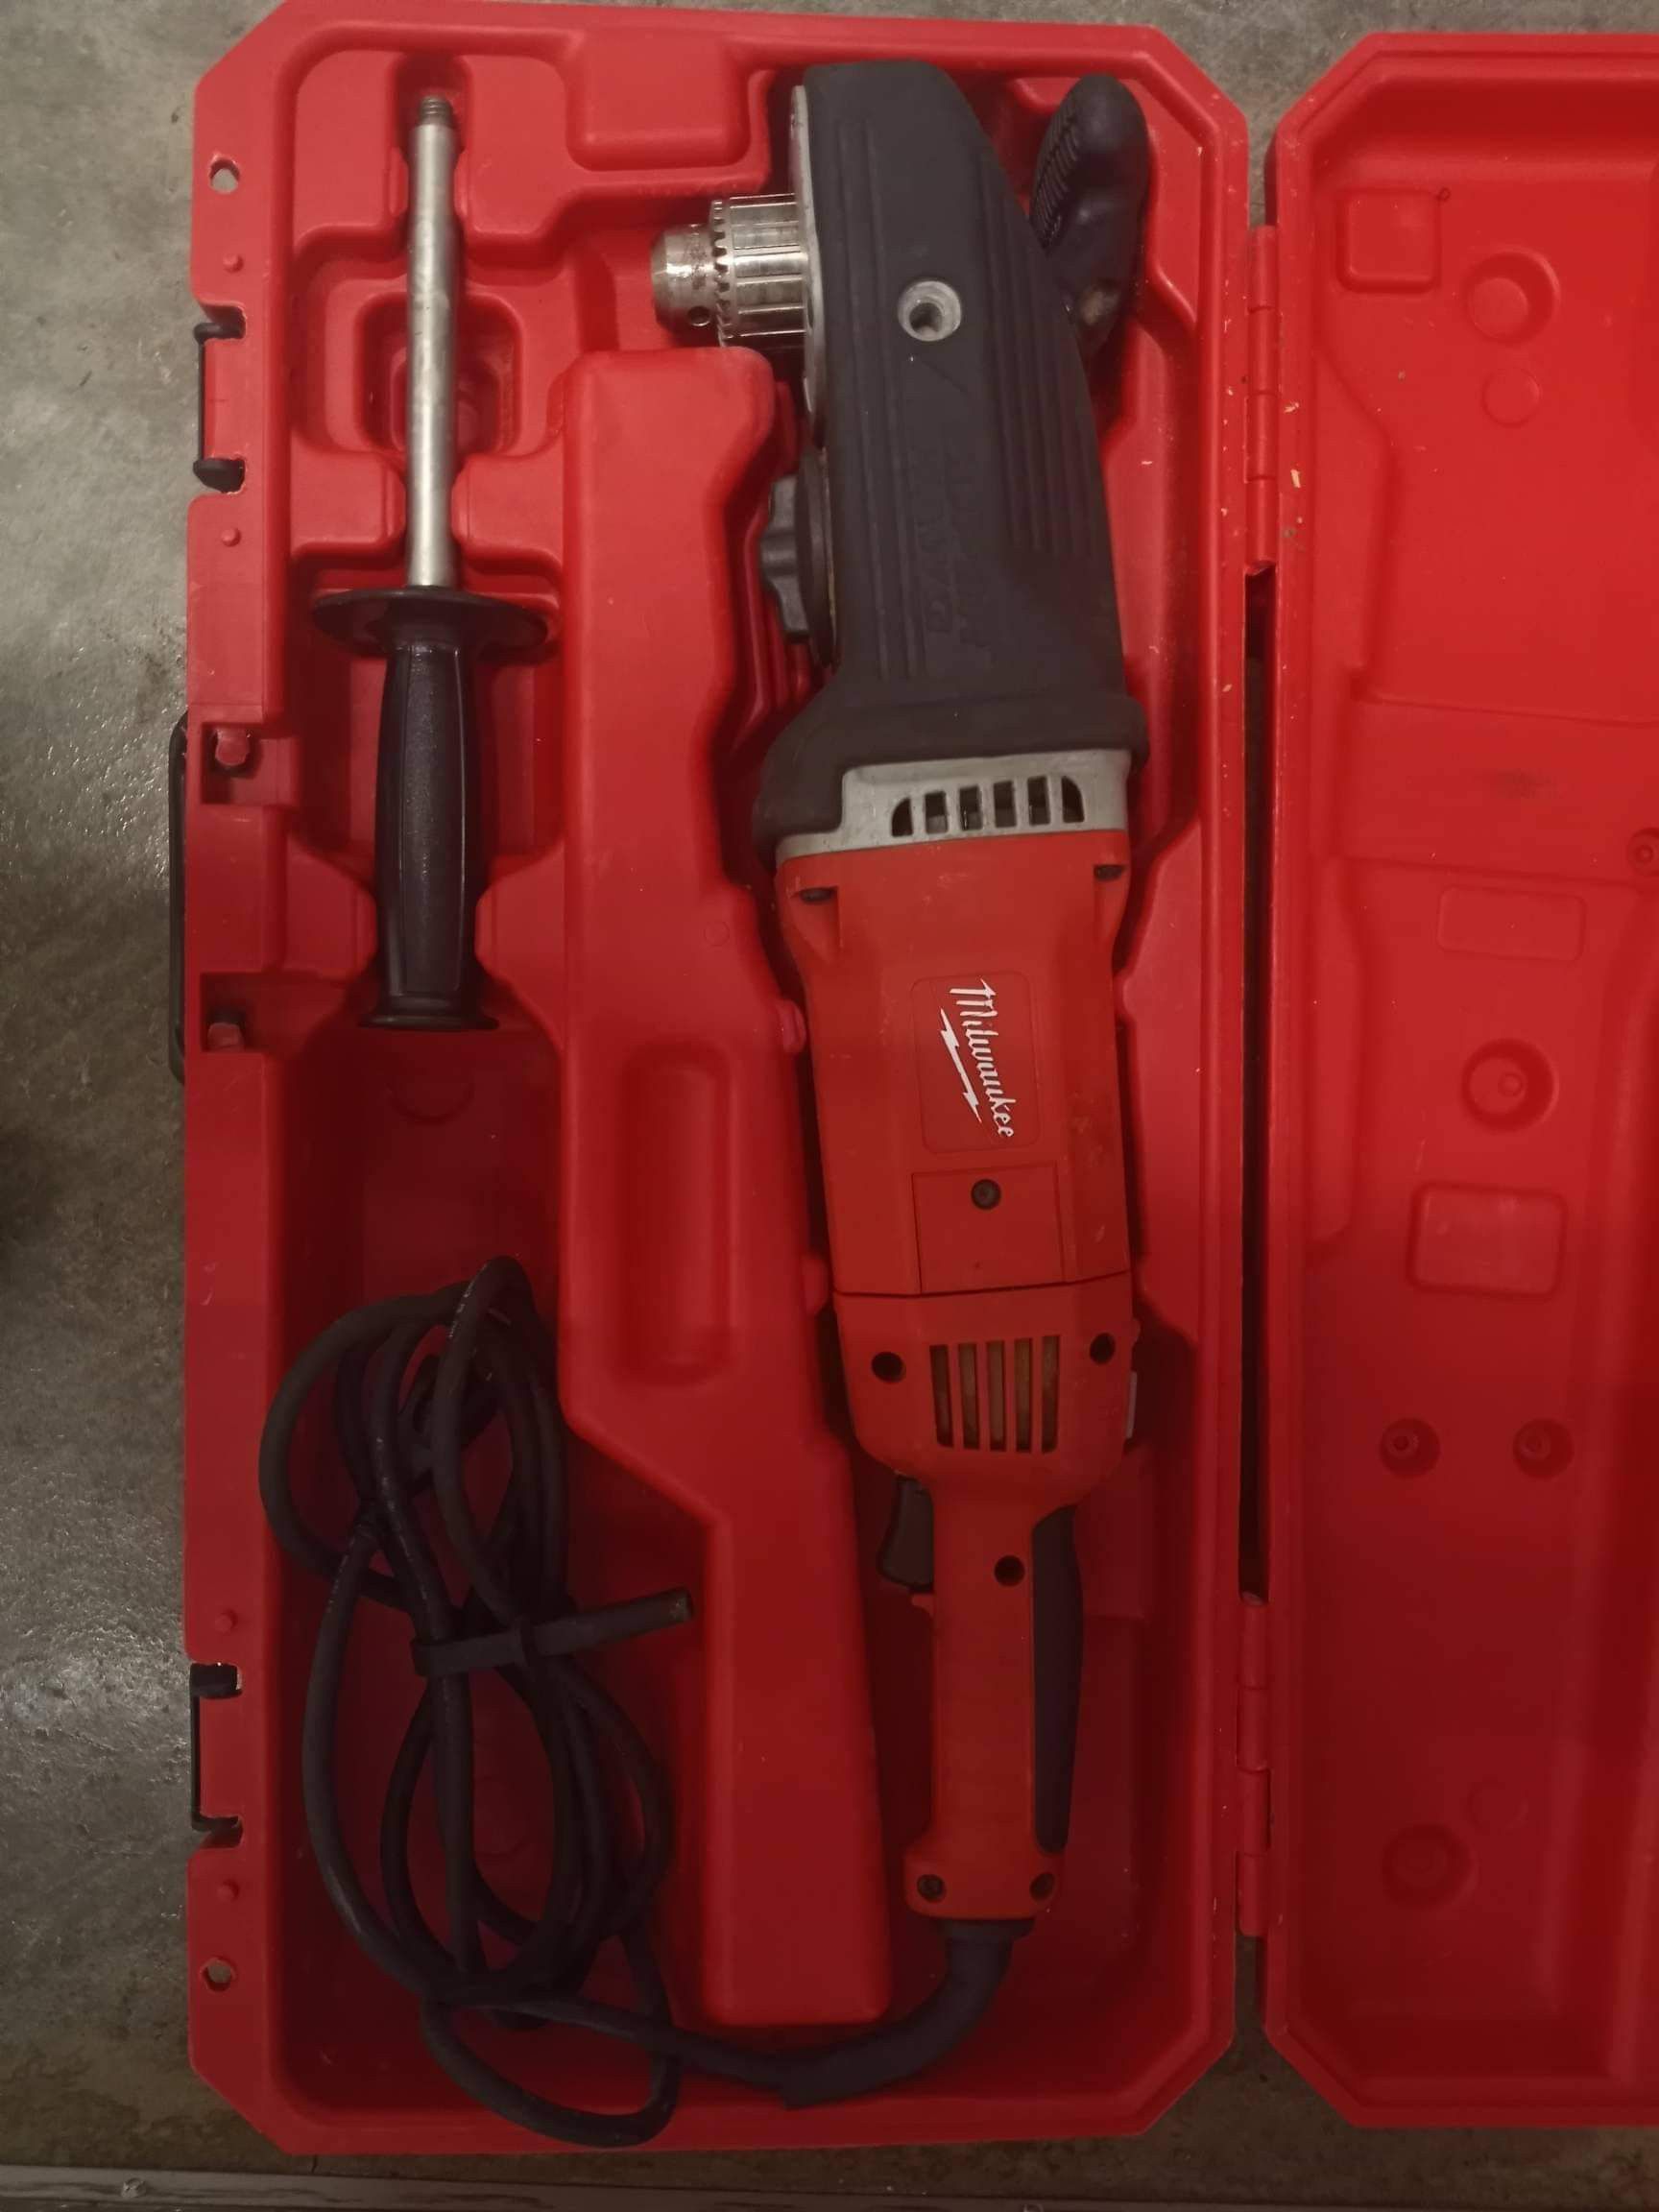 Milwaukee 1/2 inch "Super Hawg" Corded Drill